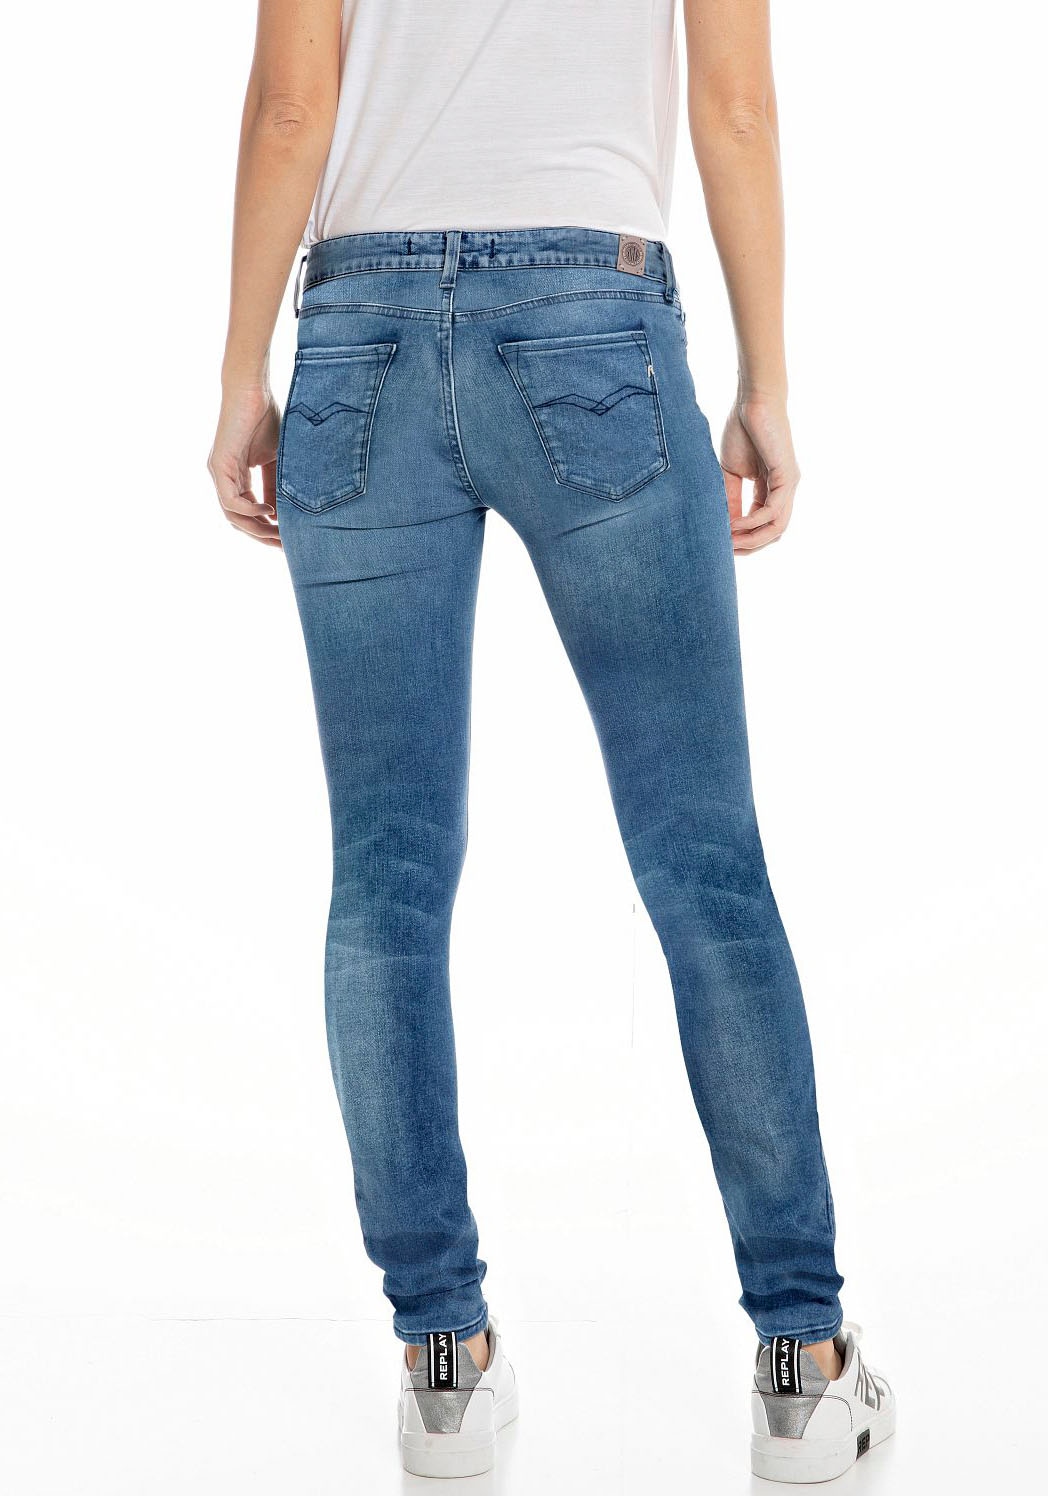 Replay Skinny-fit-Jeans »NEW in kaufen Ankle-Länge LUZ«, online